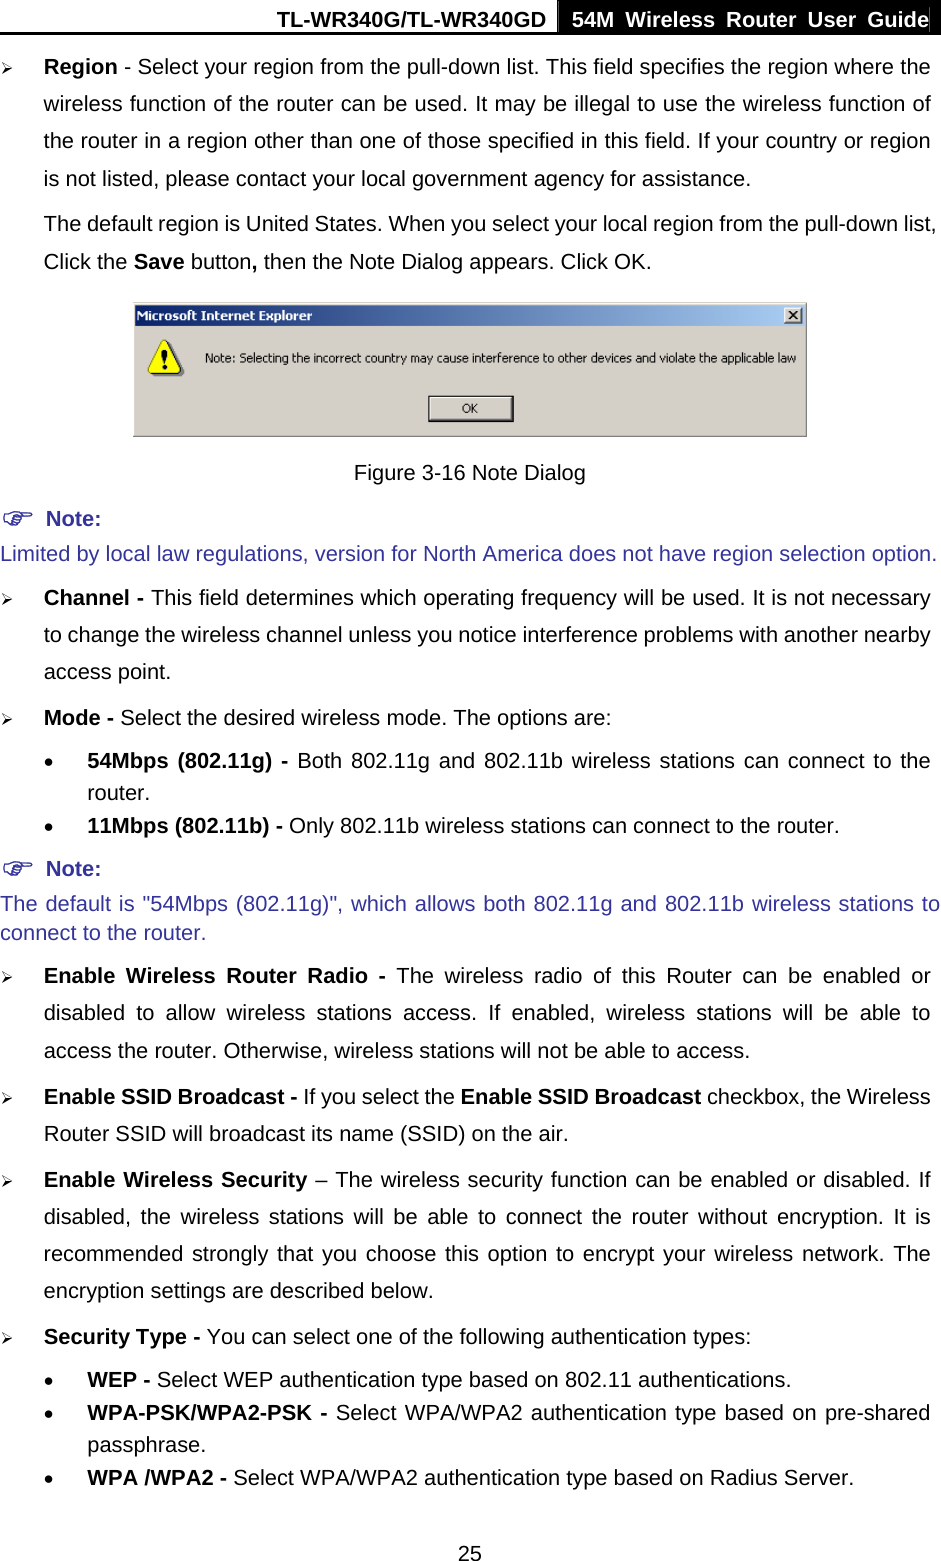 TL-WR340G/TL-WR340GD 54M Wireless Router User Guide  25¾ Region - Select your region from the pull-down list. This field specifies the region where the wireless function of the router can be used. It may be illegal to use the wireless function of the router in a region other than one of those specified in this field. If your country or region is not listed, please contact your local government agency for assistance. The default region is United States. When you select your local region from the pull-down list, Click the Save button, then the Note Dialog appears. Click OK.  Figure 3-16 Note Dialog ) Note: Limited by local law regulations, version for North America does not have region selection option. ¾ Channel - This field determines which operating frequency will be used. It is not necessary to change the wireless channel unless you notice interference problems with another nearby access point. ¾ Mode - Select the desired wireless mode. The options are:   • 54Mbps (802.11g) - Both 802.11g and 802.11b wireless stations can connect to the router. • 11Mbps (802.11b) - Only 802.11b wireless stations can connect to the router. ) Note: The default is &quot;54Mbps (802.11g)&quot;, which allows both 802.11g and 802.11b wireless stations to connect to the router. ¾ Enable Wireless Router Radio - The wireless radio of this Router can be enabled or disabled to allow wireless stations access. If enabled, wireless stations will be able to access the router. Otherwise, wireless stations will not be able to access. ¾ Enable SSID Broadcast - If you select the Enable SSID Broadcast checkbox, the Wireless Router SSID will broadcast its name (SSID) on the air. ¾ Enable Wireless Security – The wireless security function can be enabled or disabled. If disabled, the wireless stations will be able to connect the router without encryption. It is recommended strongly that you choose this option to encrypt your wireless network. The encryption settings are described below. ¾ Security Type - You can select one of the following authentication types: • WEP - Select WEP authentication type based on 802.11 authentications. • WPA-PSK/WPA2-PSK - Select WPA/WPA2 authentication type based on pre-shared passphrase.  • WPA /WPA2 - Select WPA/WPA2 authentication type based on Radius Server. 